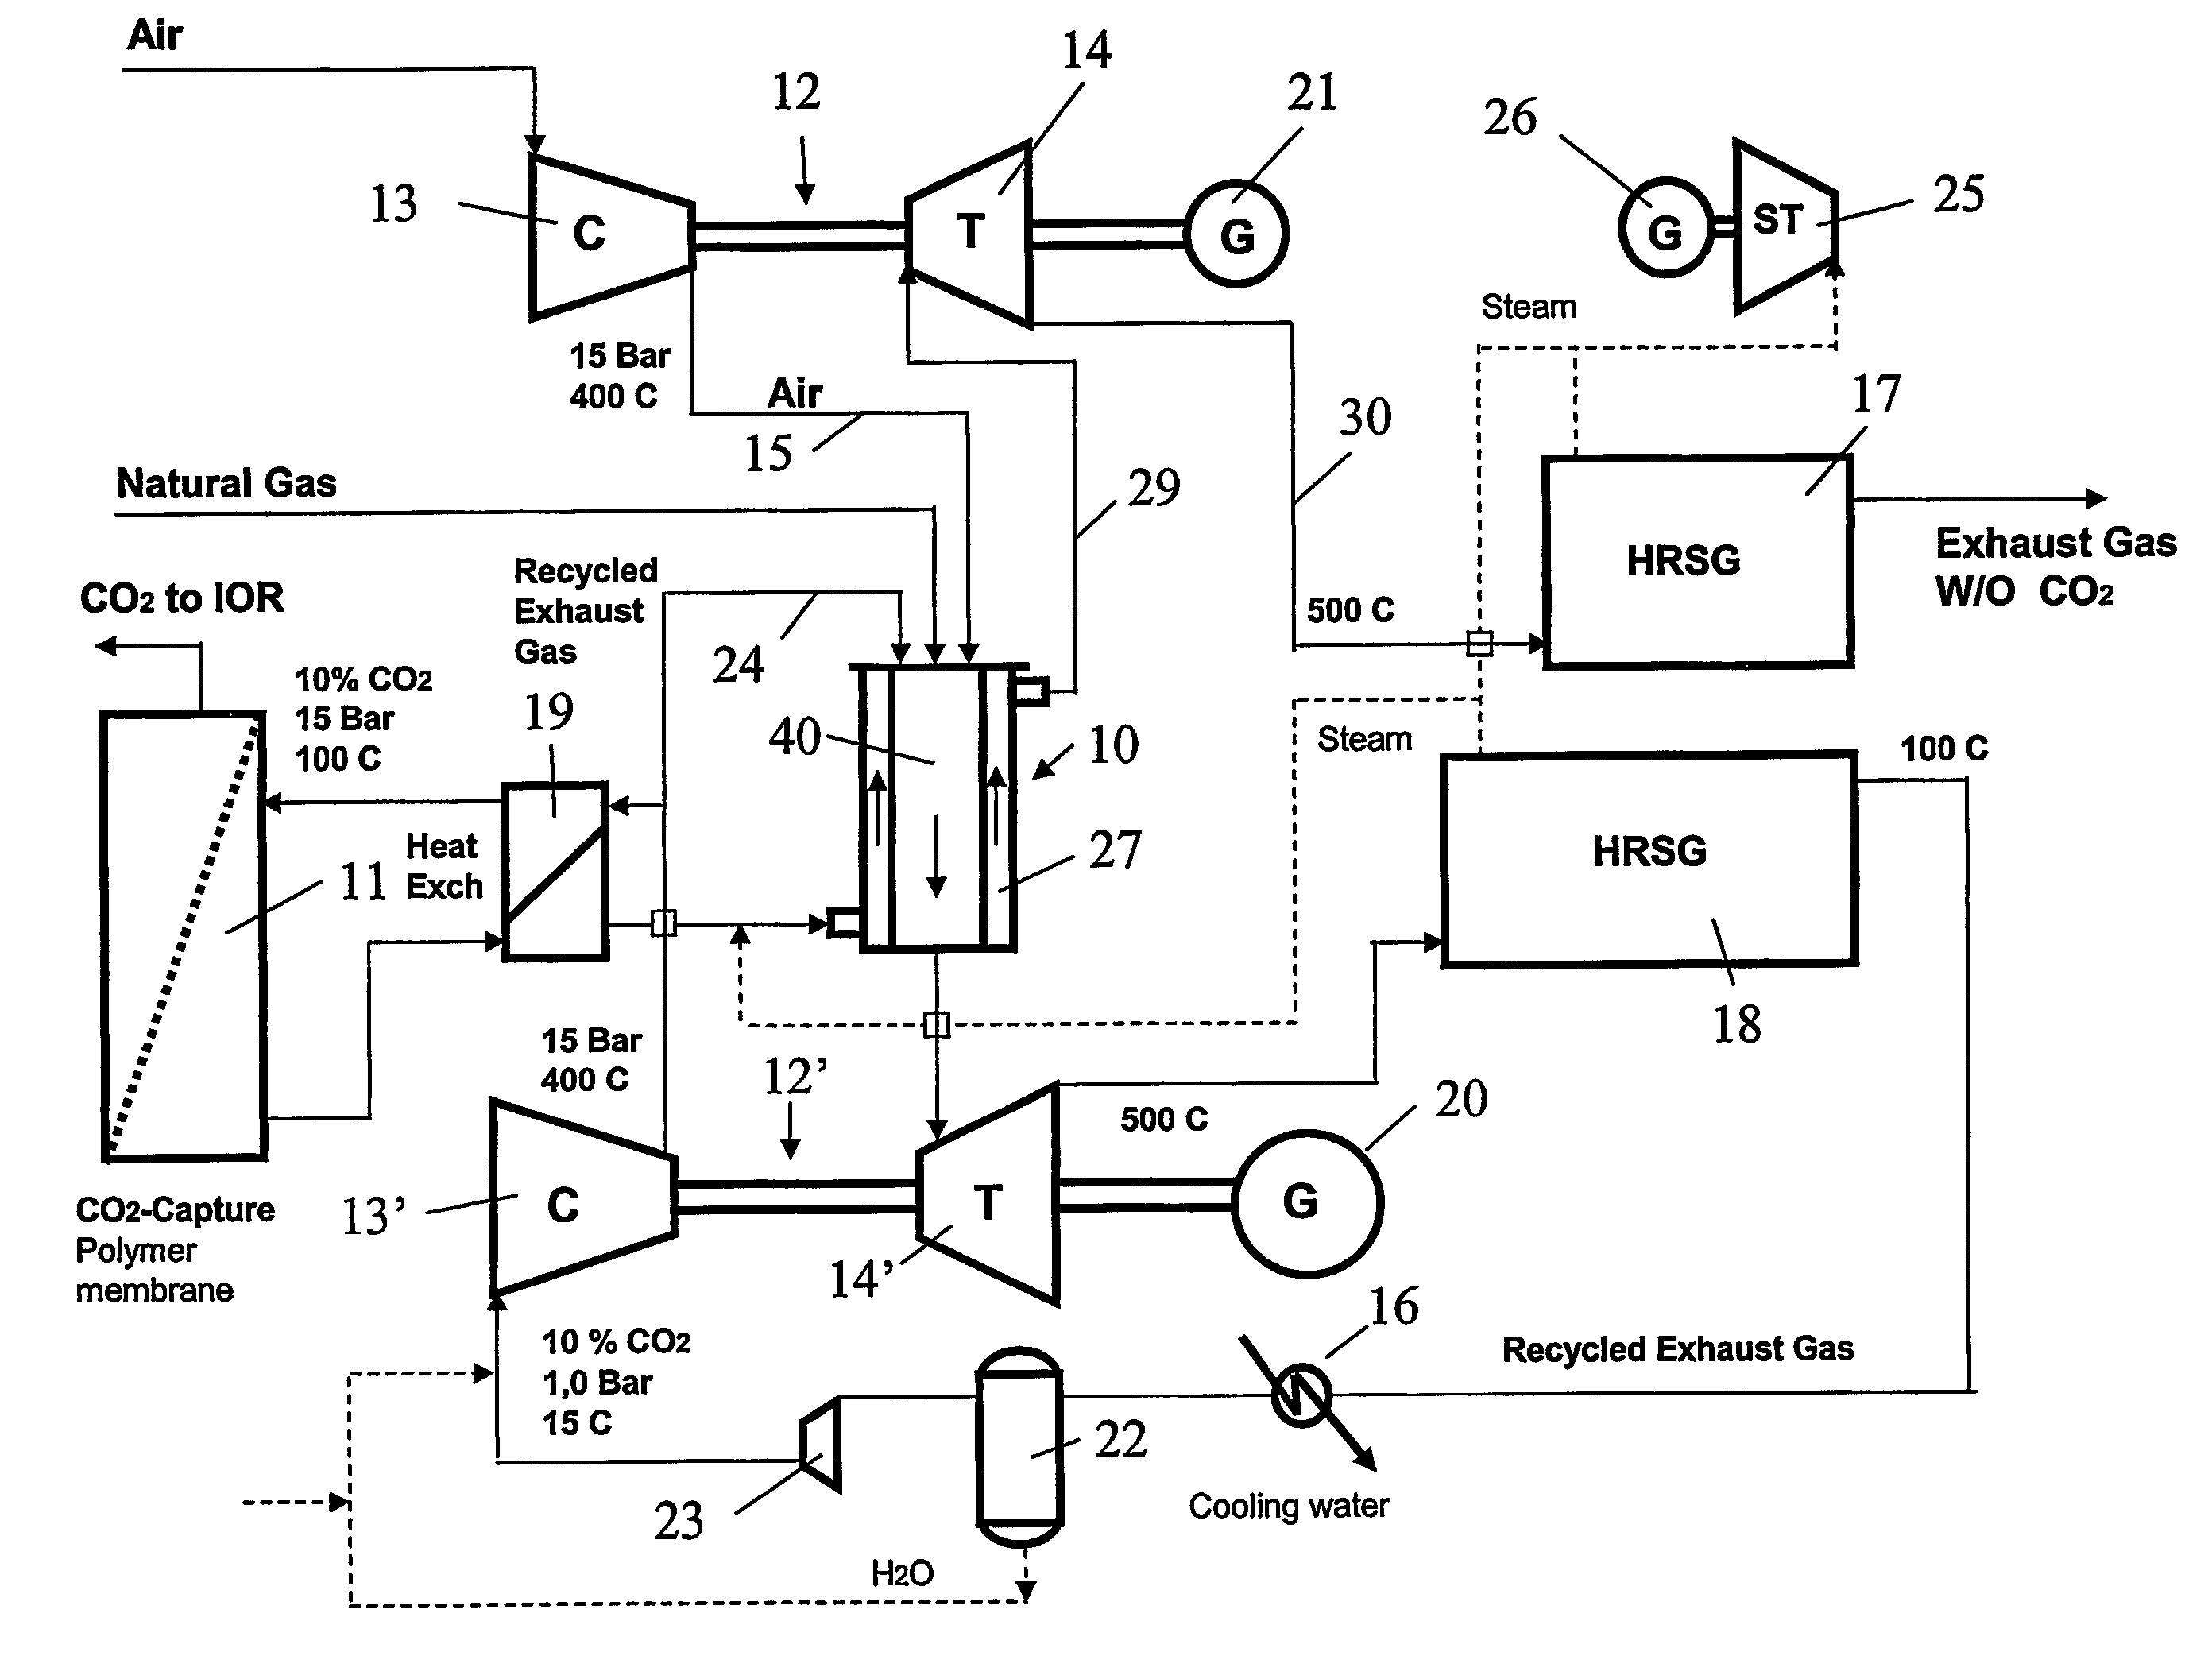 Efficient combined cycle power plant with CO2 capture and a combustor arrangement with separate flows